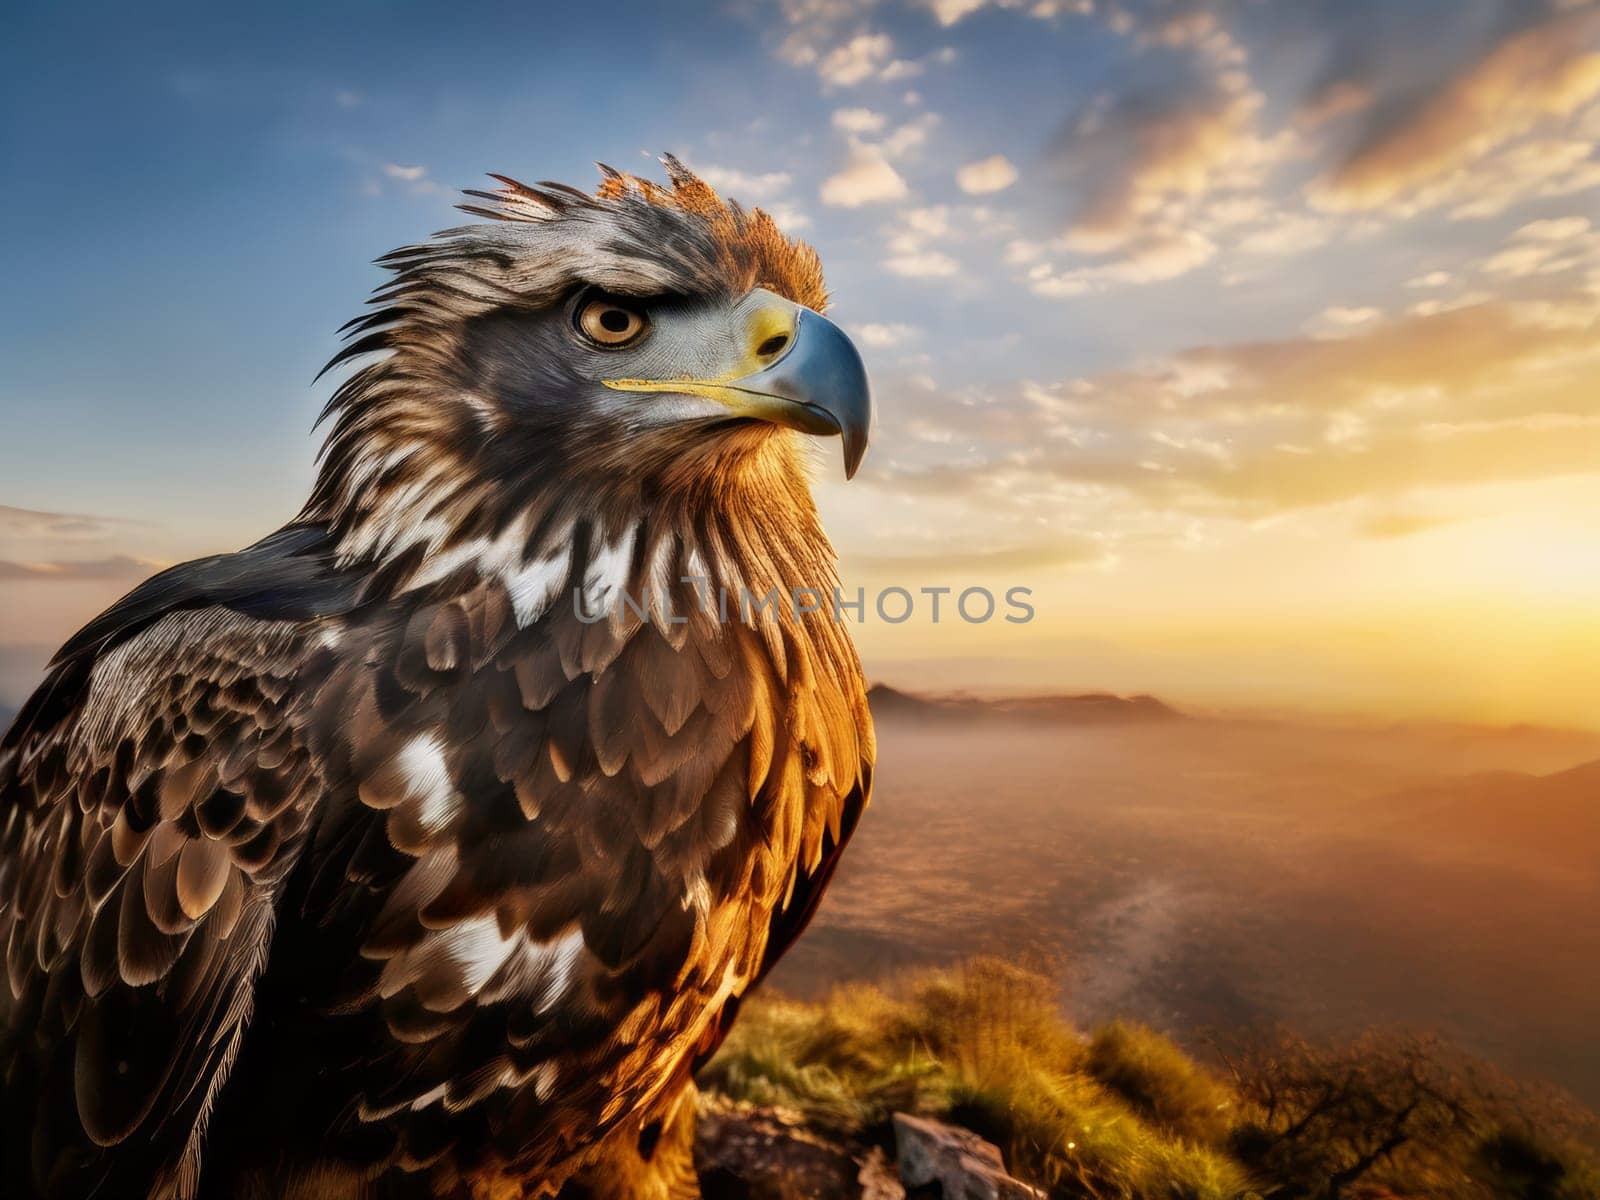 Portrait of big eagle. Birdwatching. Eagle in natural environment on amazing landscape